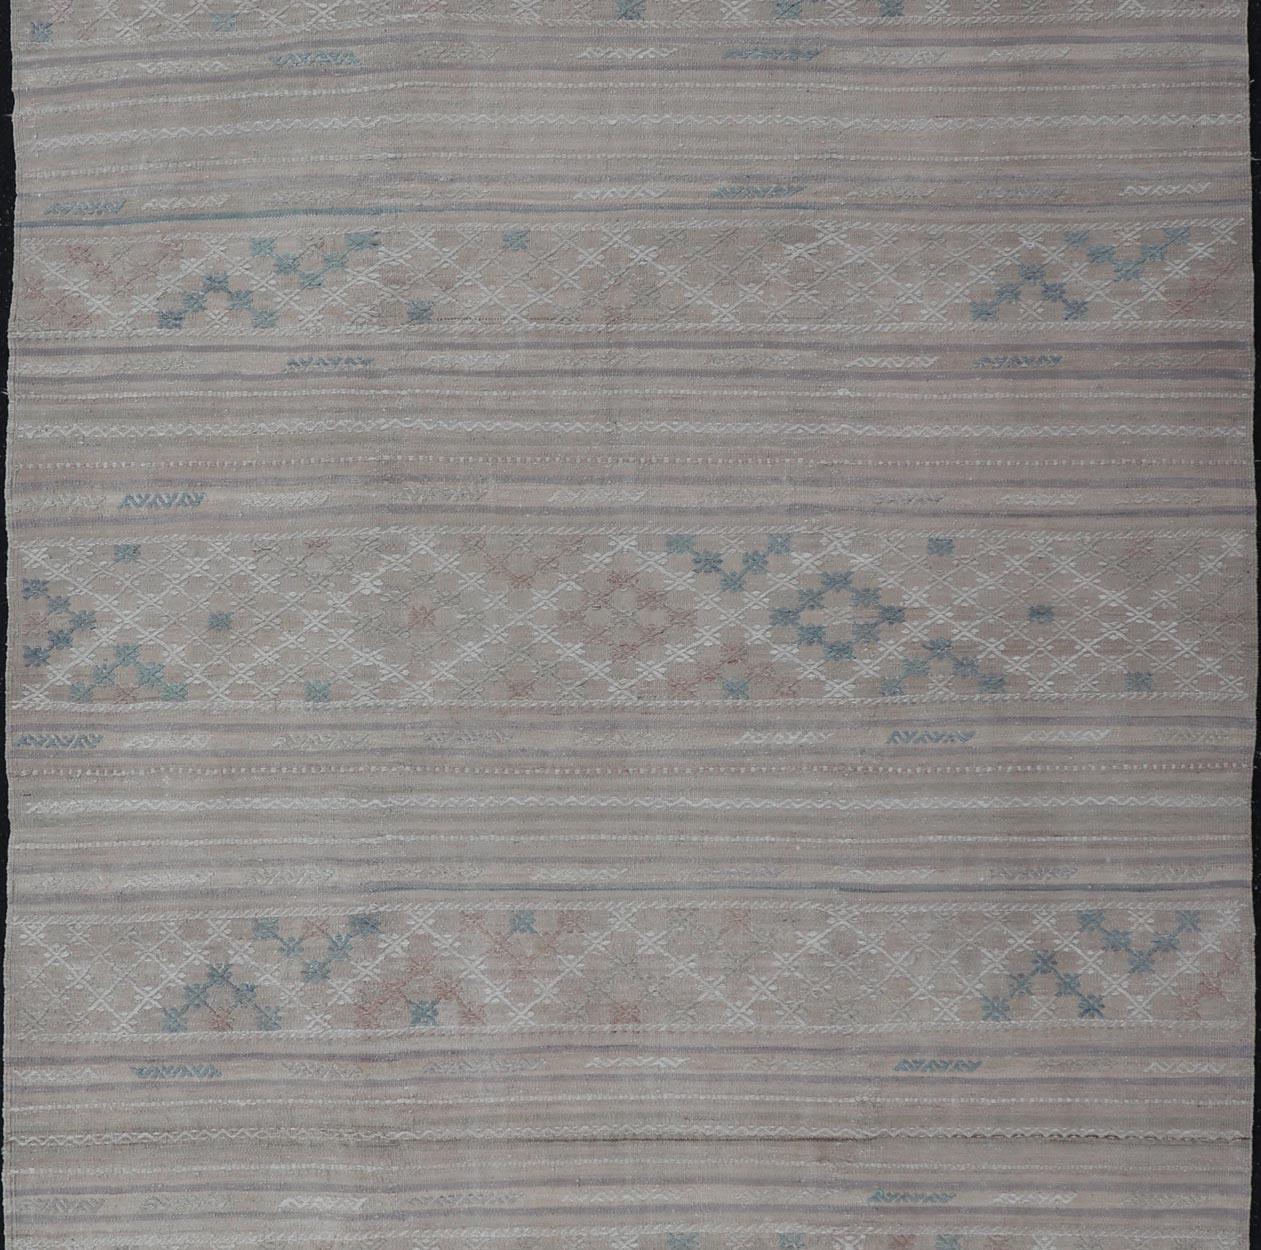 Vintage Turkish Kilim Rug with Neutral Horizontal Stripes and Geometric Designs. Keivan Woven Arts / rug EN-15177, country of origin / type: Turkey / Kilim, circa 1950
Measures: 6'1 x 10'0 
Featuring geometric shapes rendered in a repeating